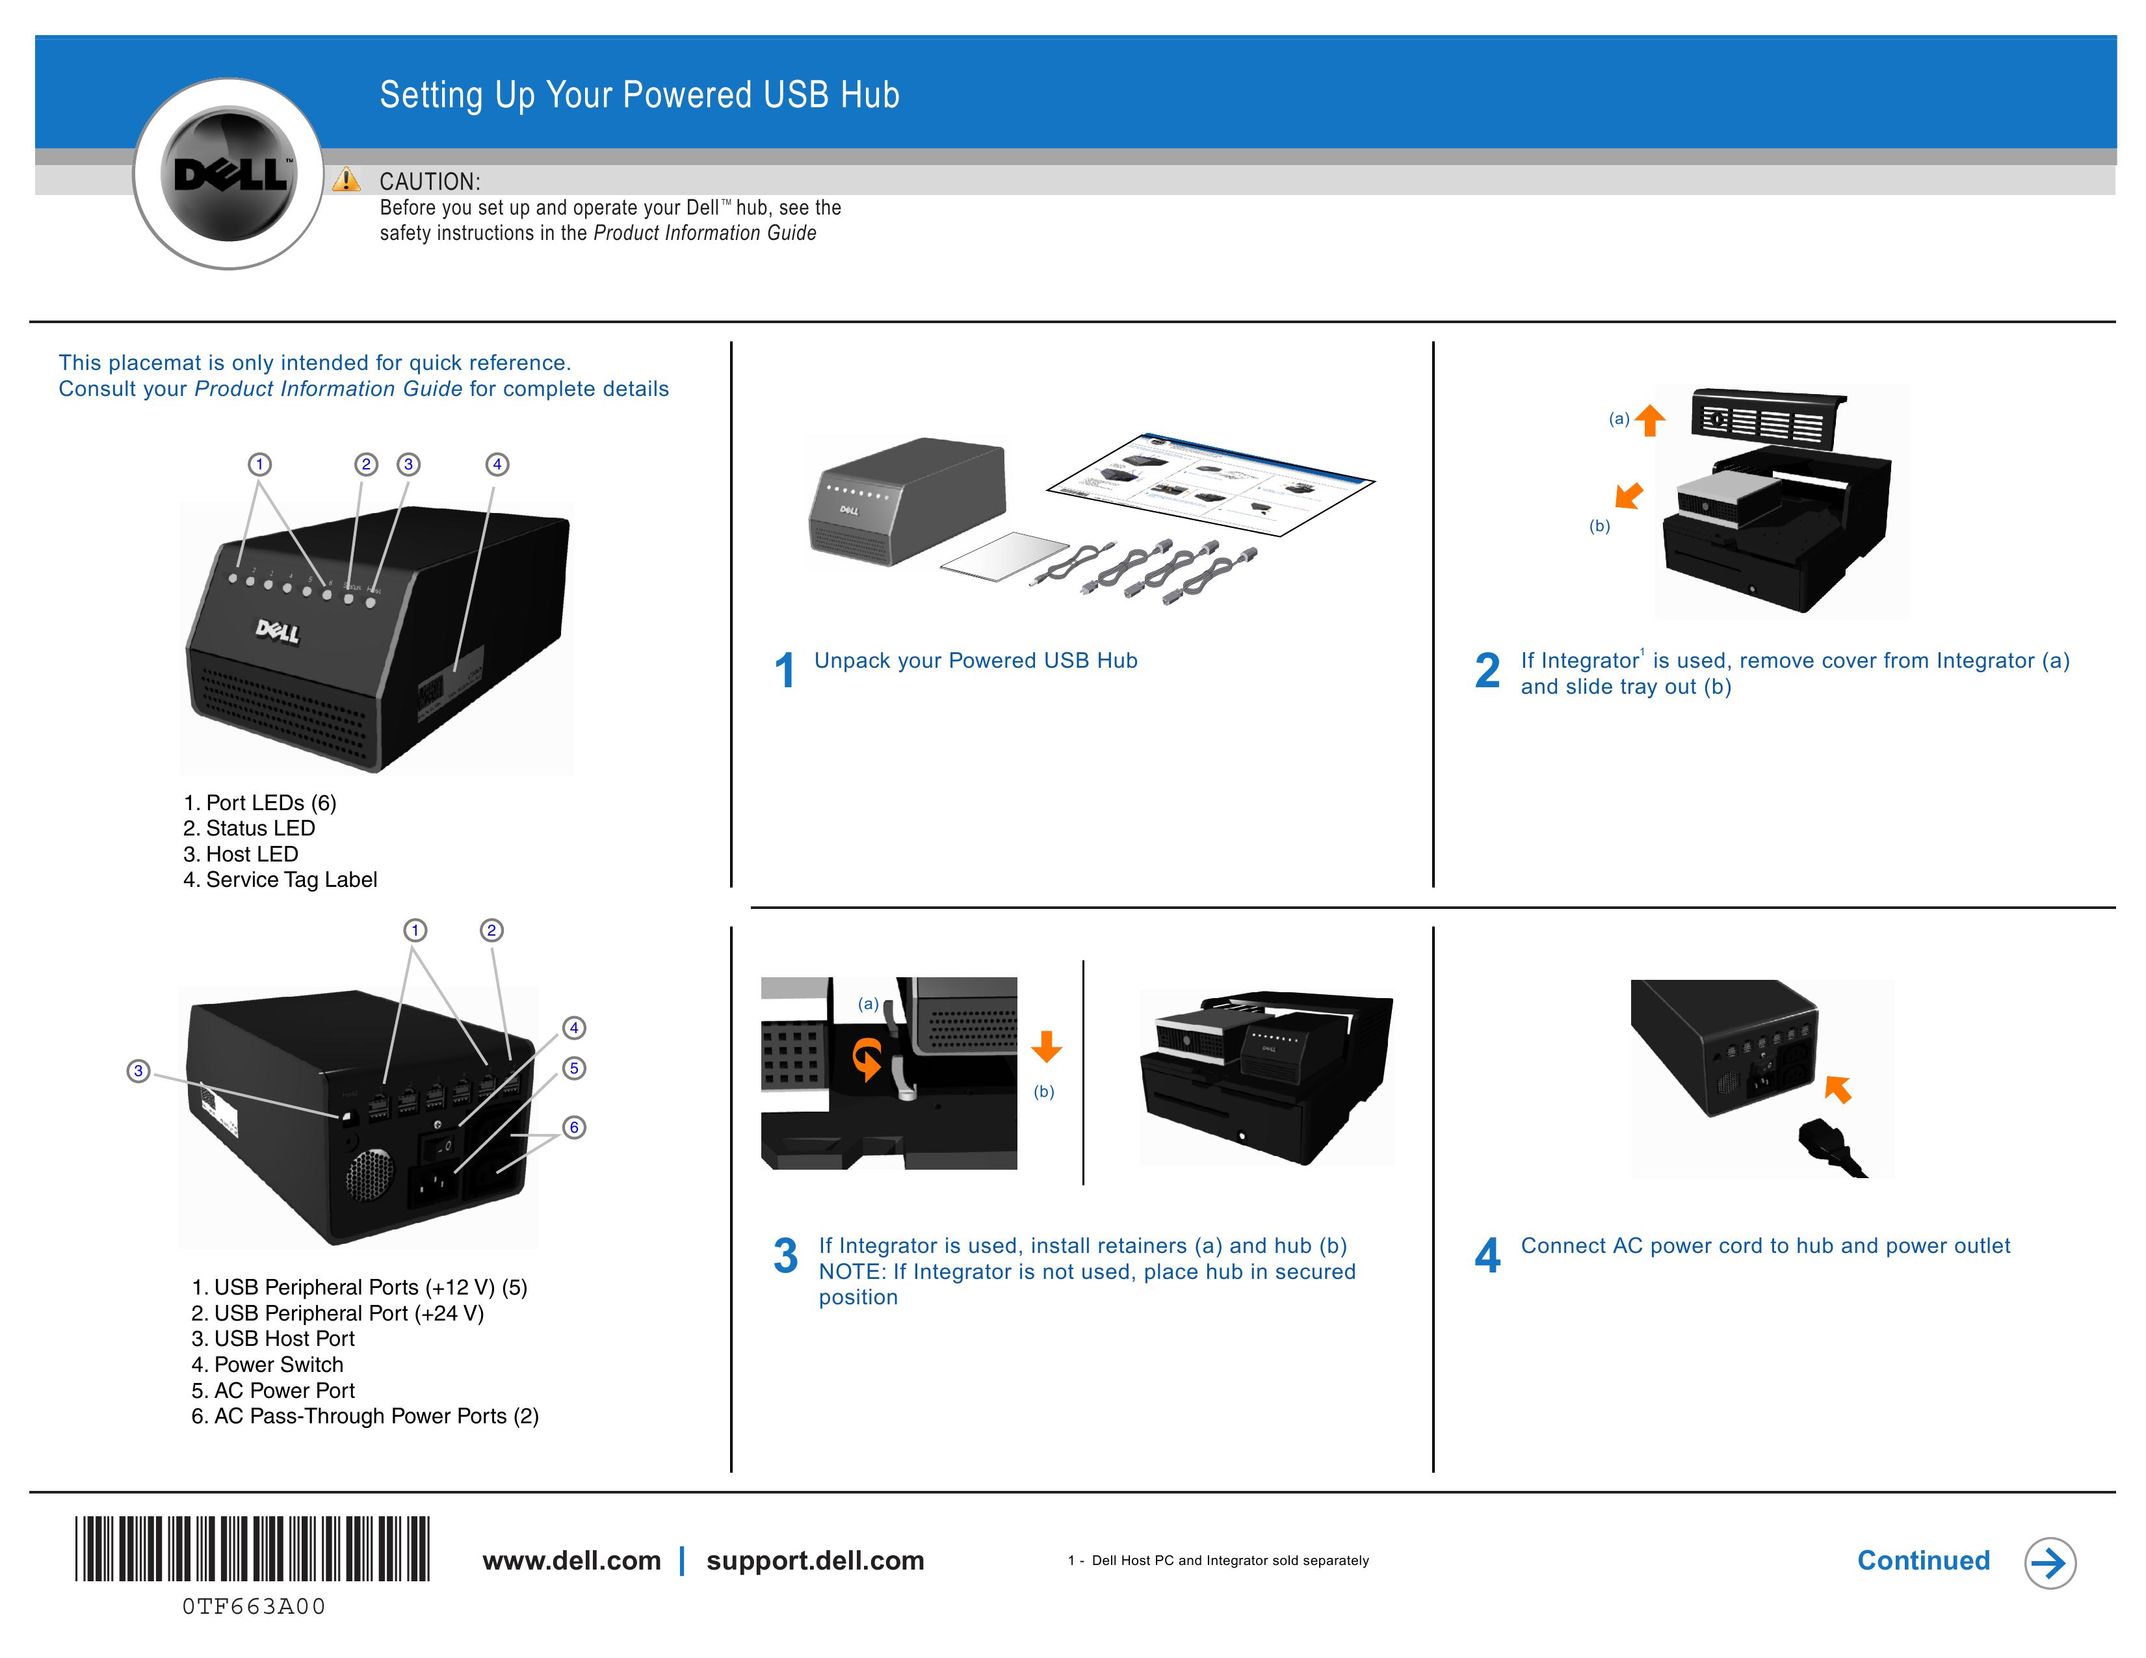 Dell 0TF663A00 Switch User Manual